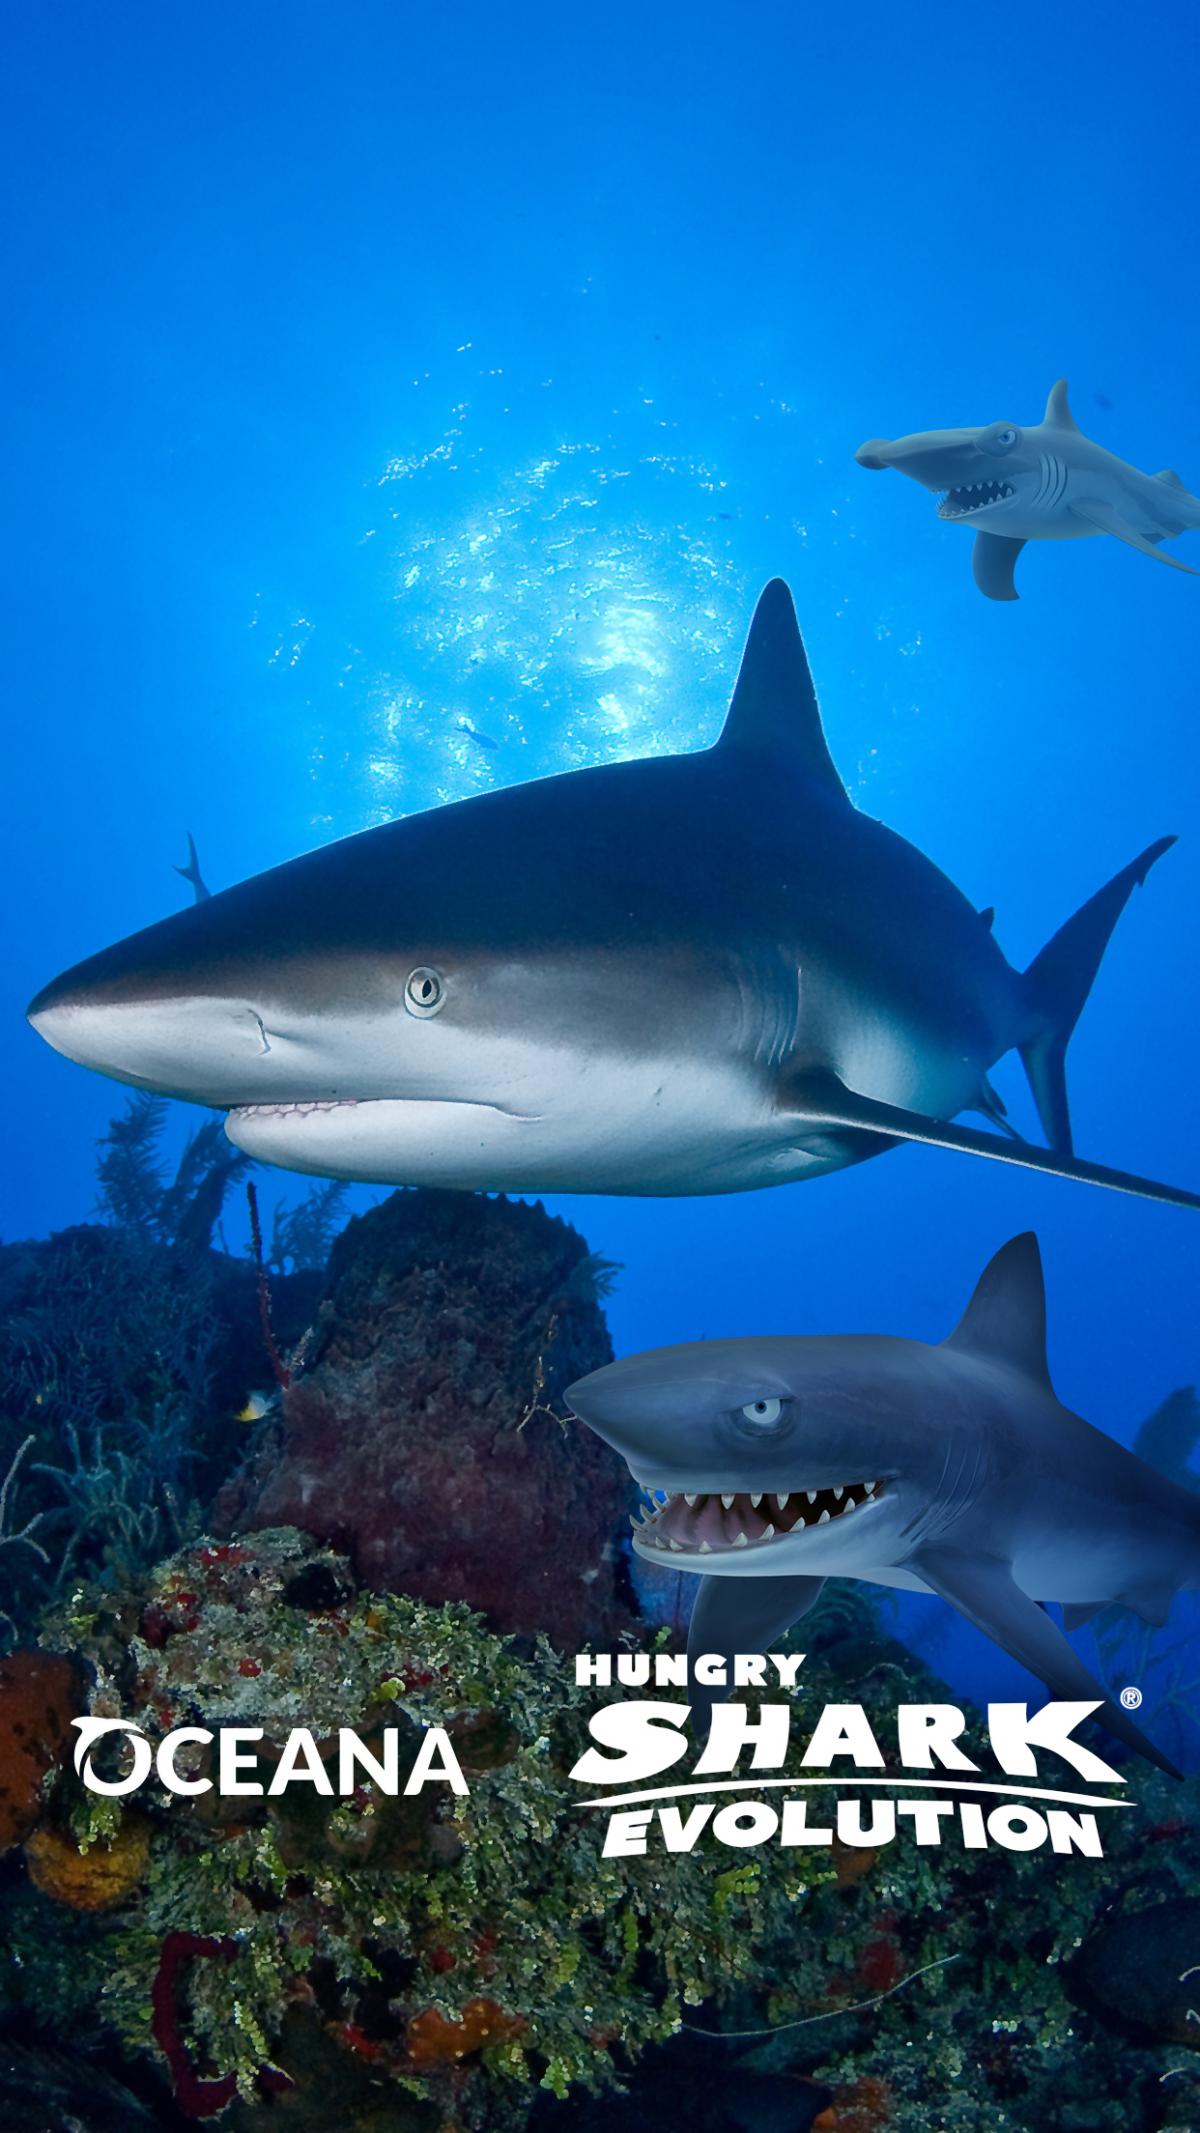 Download this wallpaper from Hungry Sharks Evolution and Oceana.